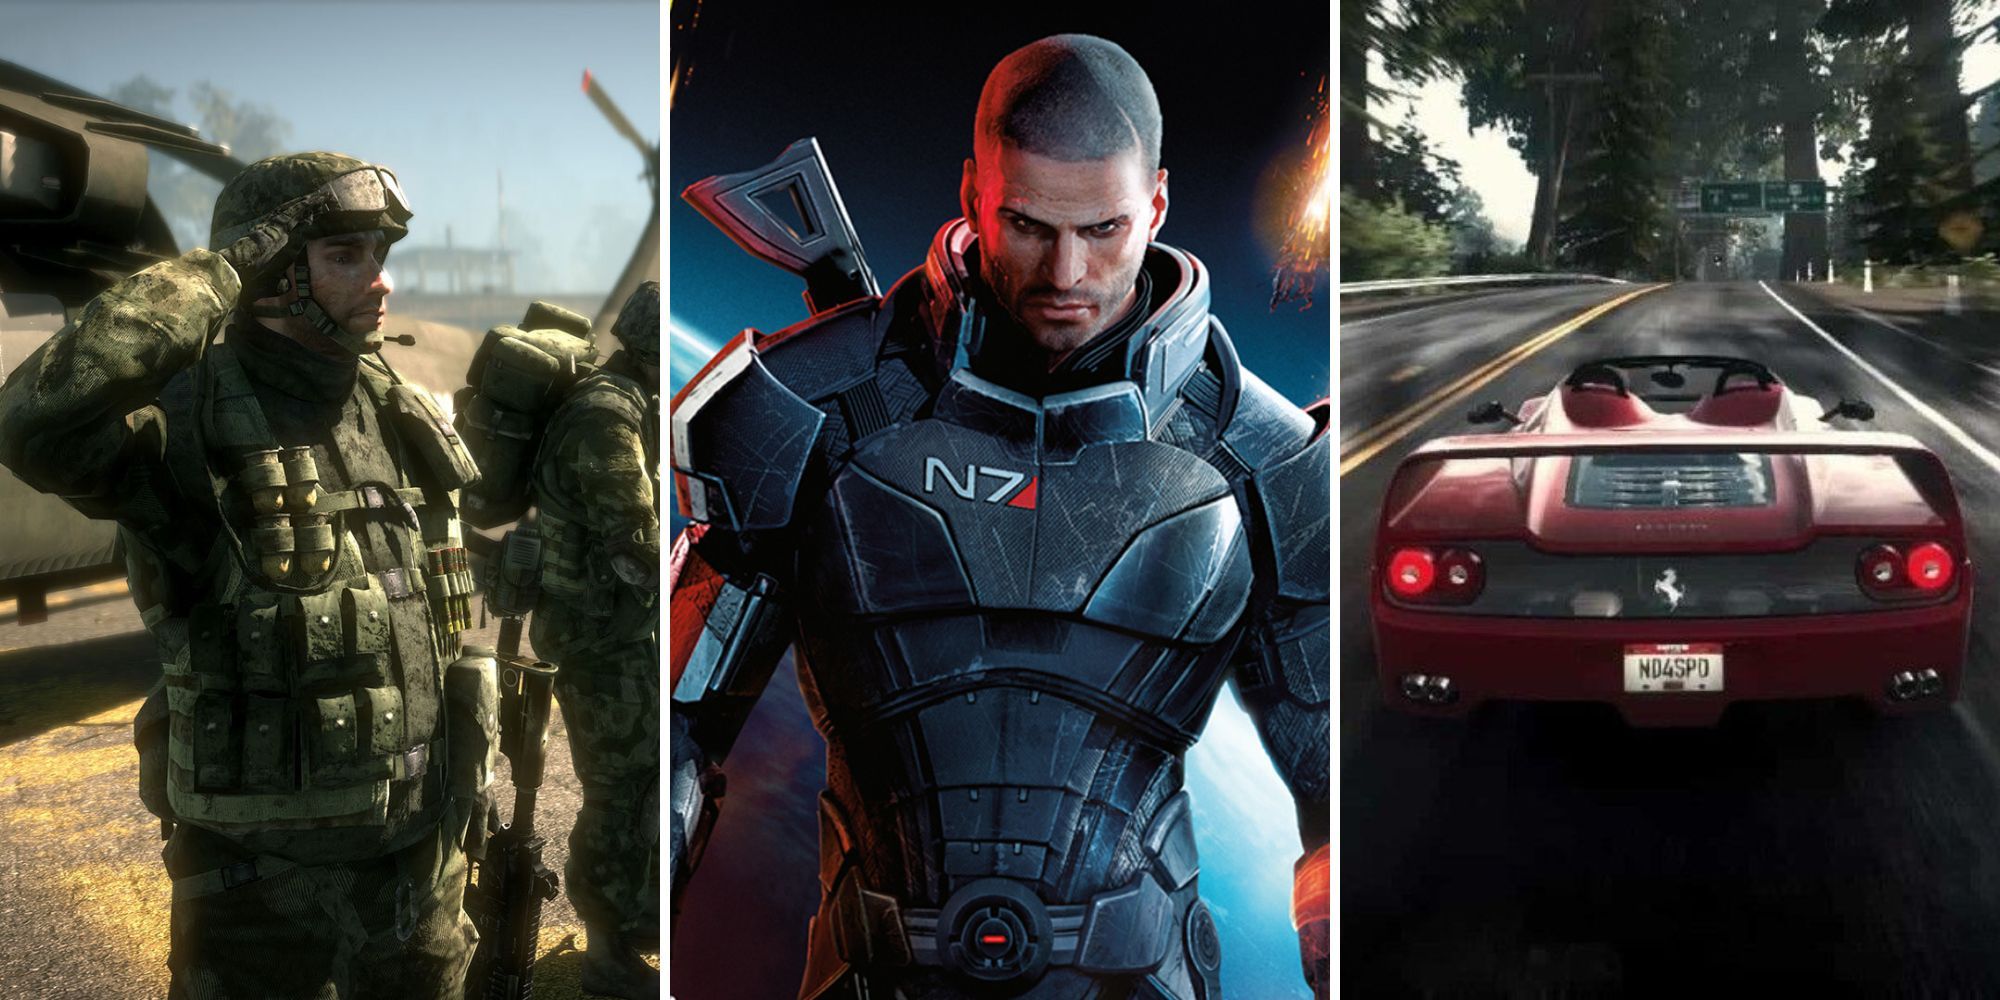 A grid showing the EA PS3 games Battlefield: Bad Company, Mass Effect 3, and Need For Speed: Hot Pursuit